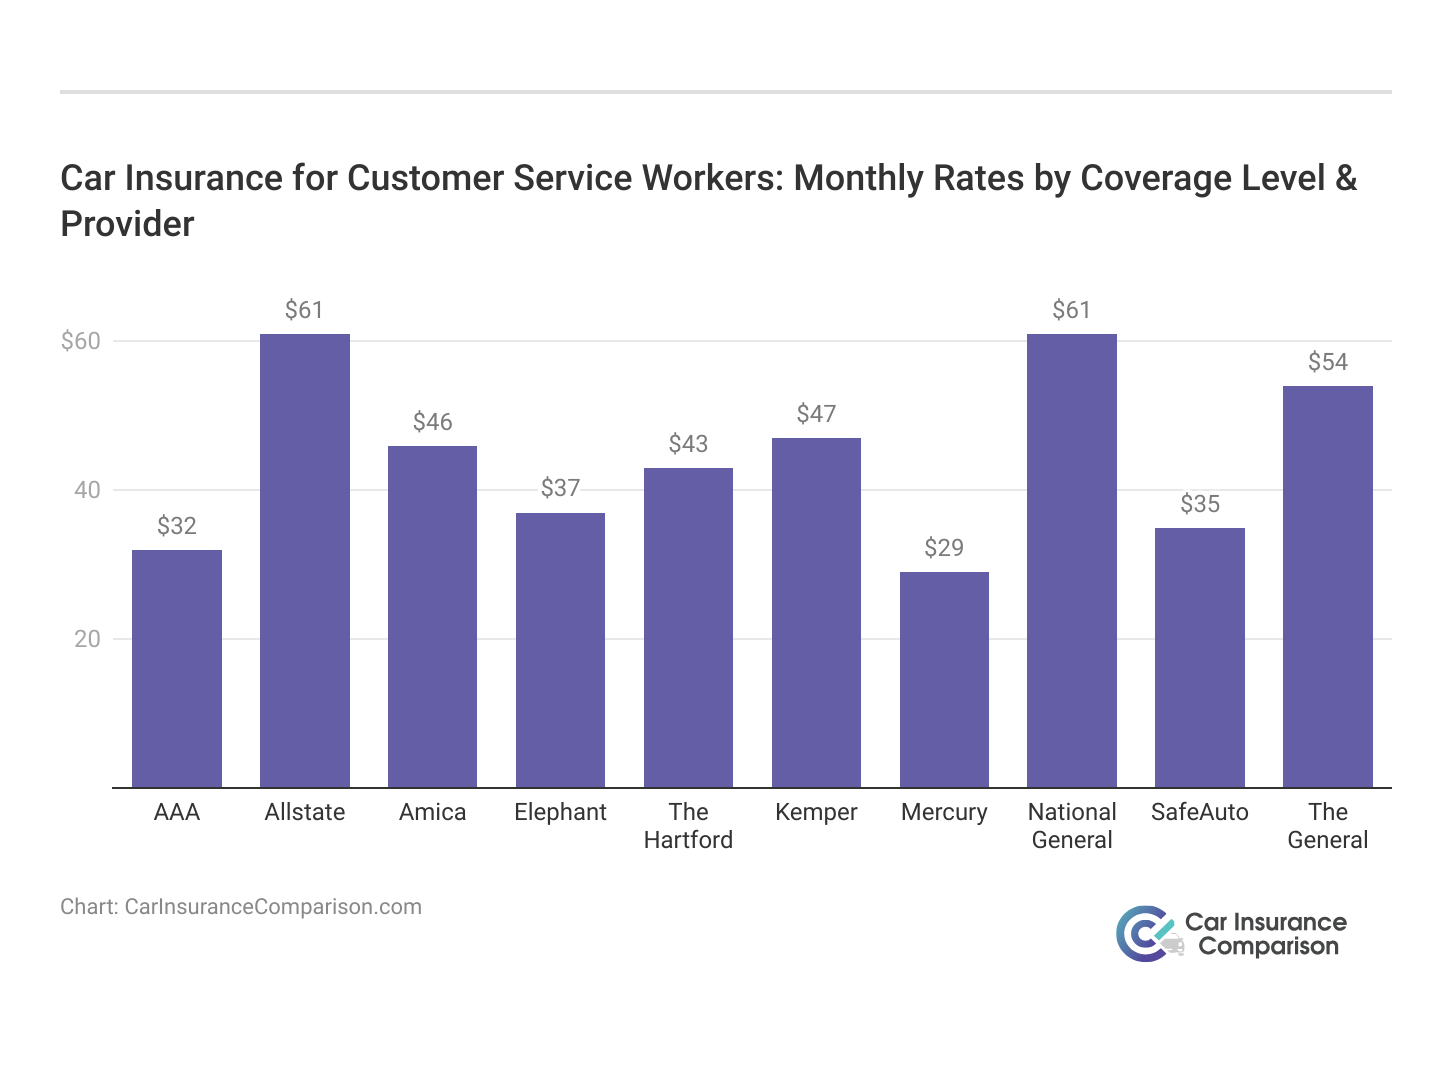 <h3>Car Insurance for Customer Service Workers: Monthly Rates by Coverage Level & Provider</h3>